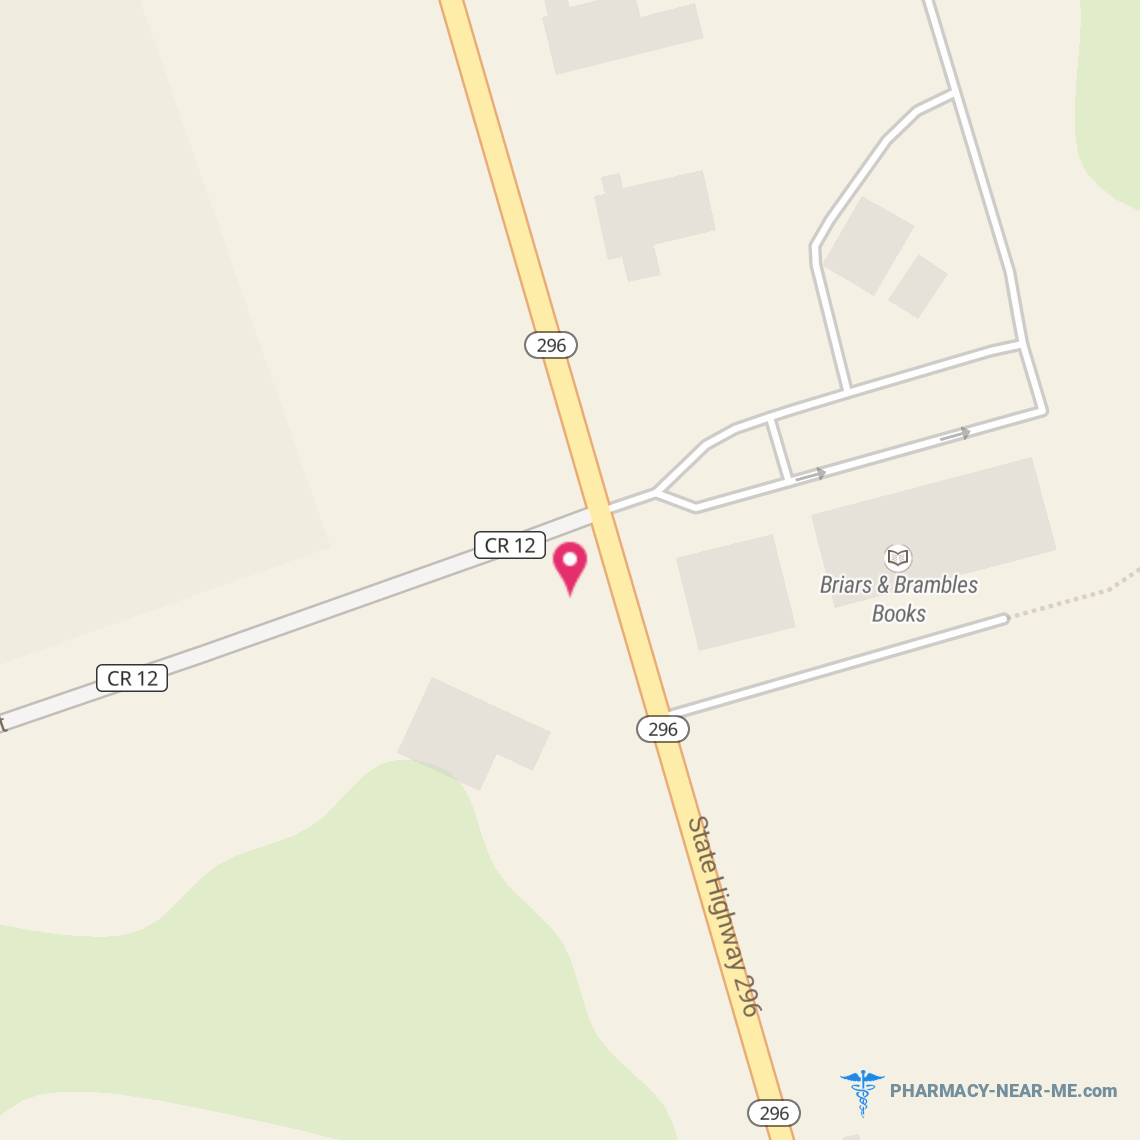 WINDHAM PHARMACY - Pharmacy Hours, Phone, Reviews & Information: State Route 296, Windham, New York 12496, United States